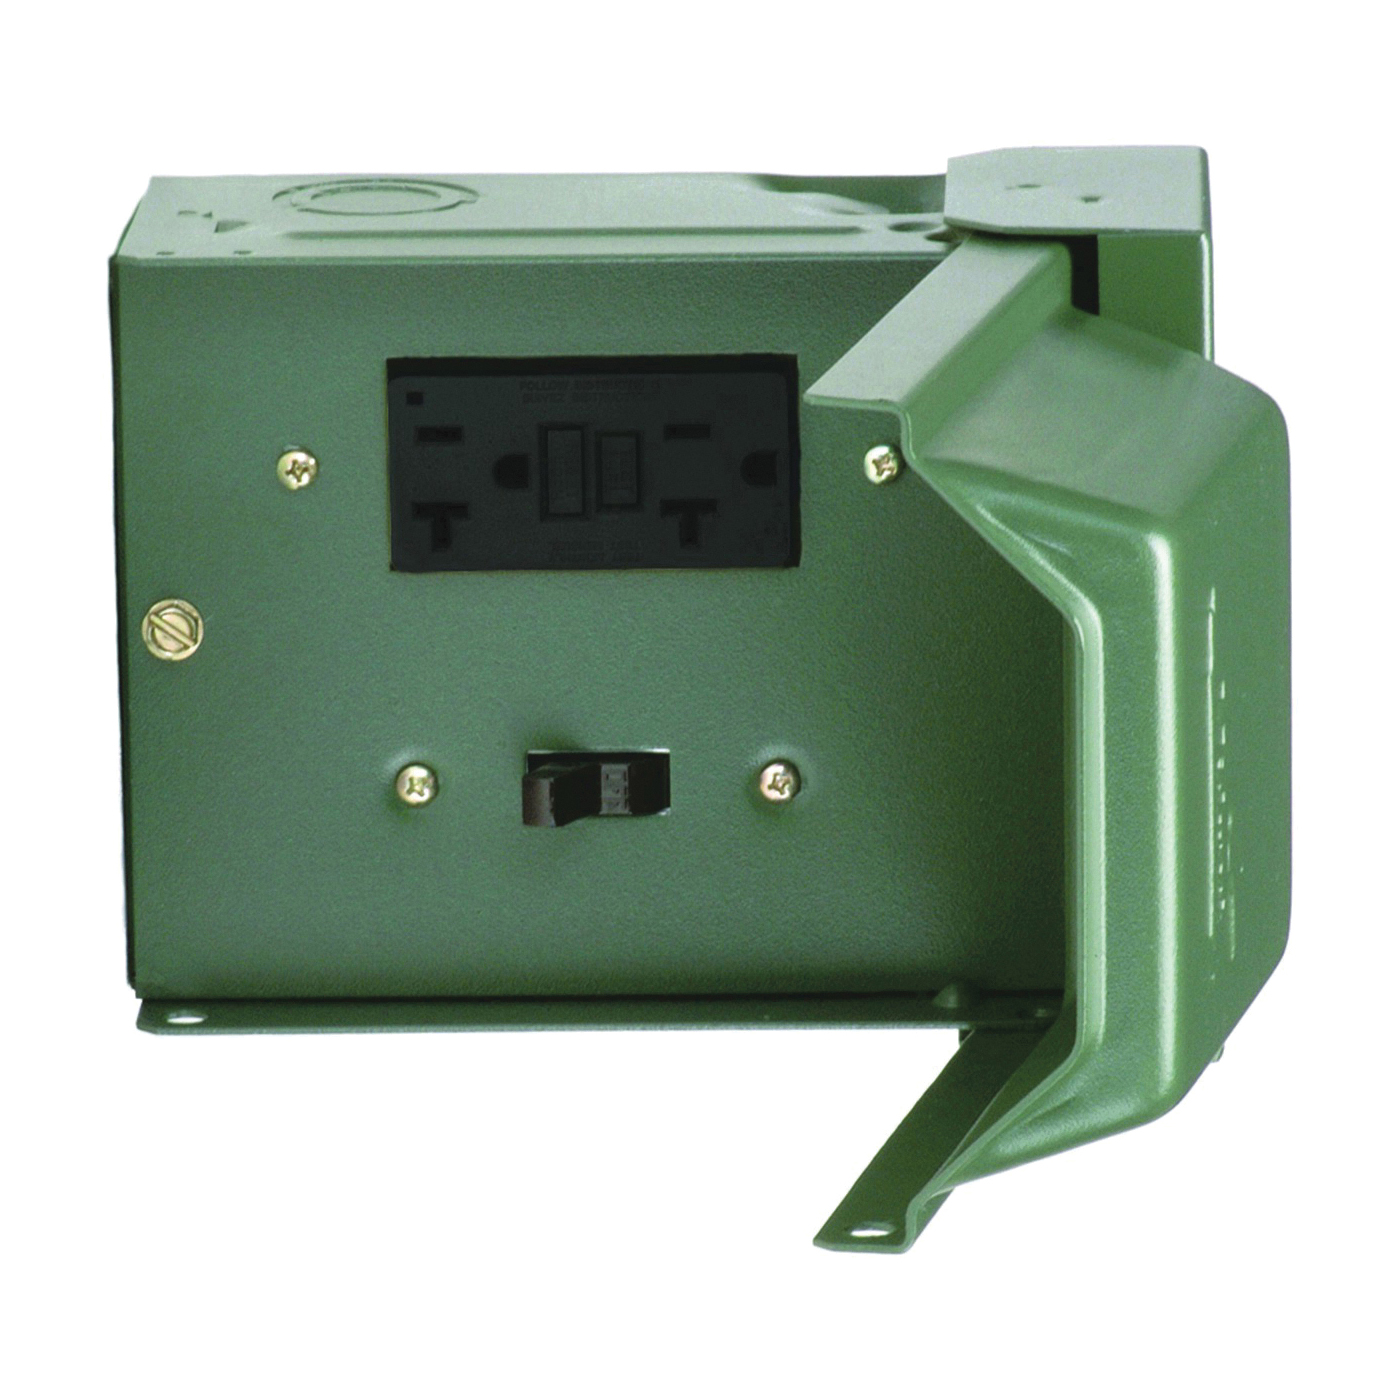 U010S010GRP Power Outlet, 20 A, 120 V, Green